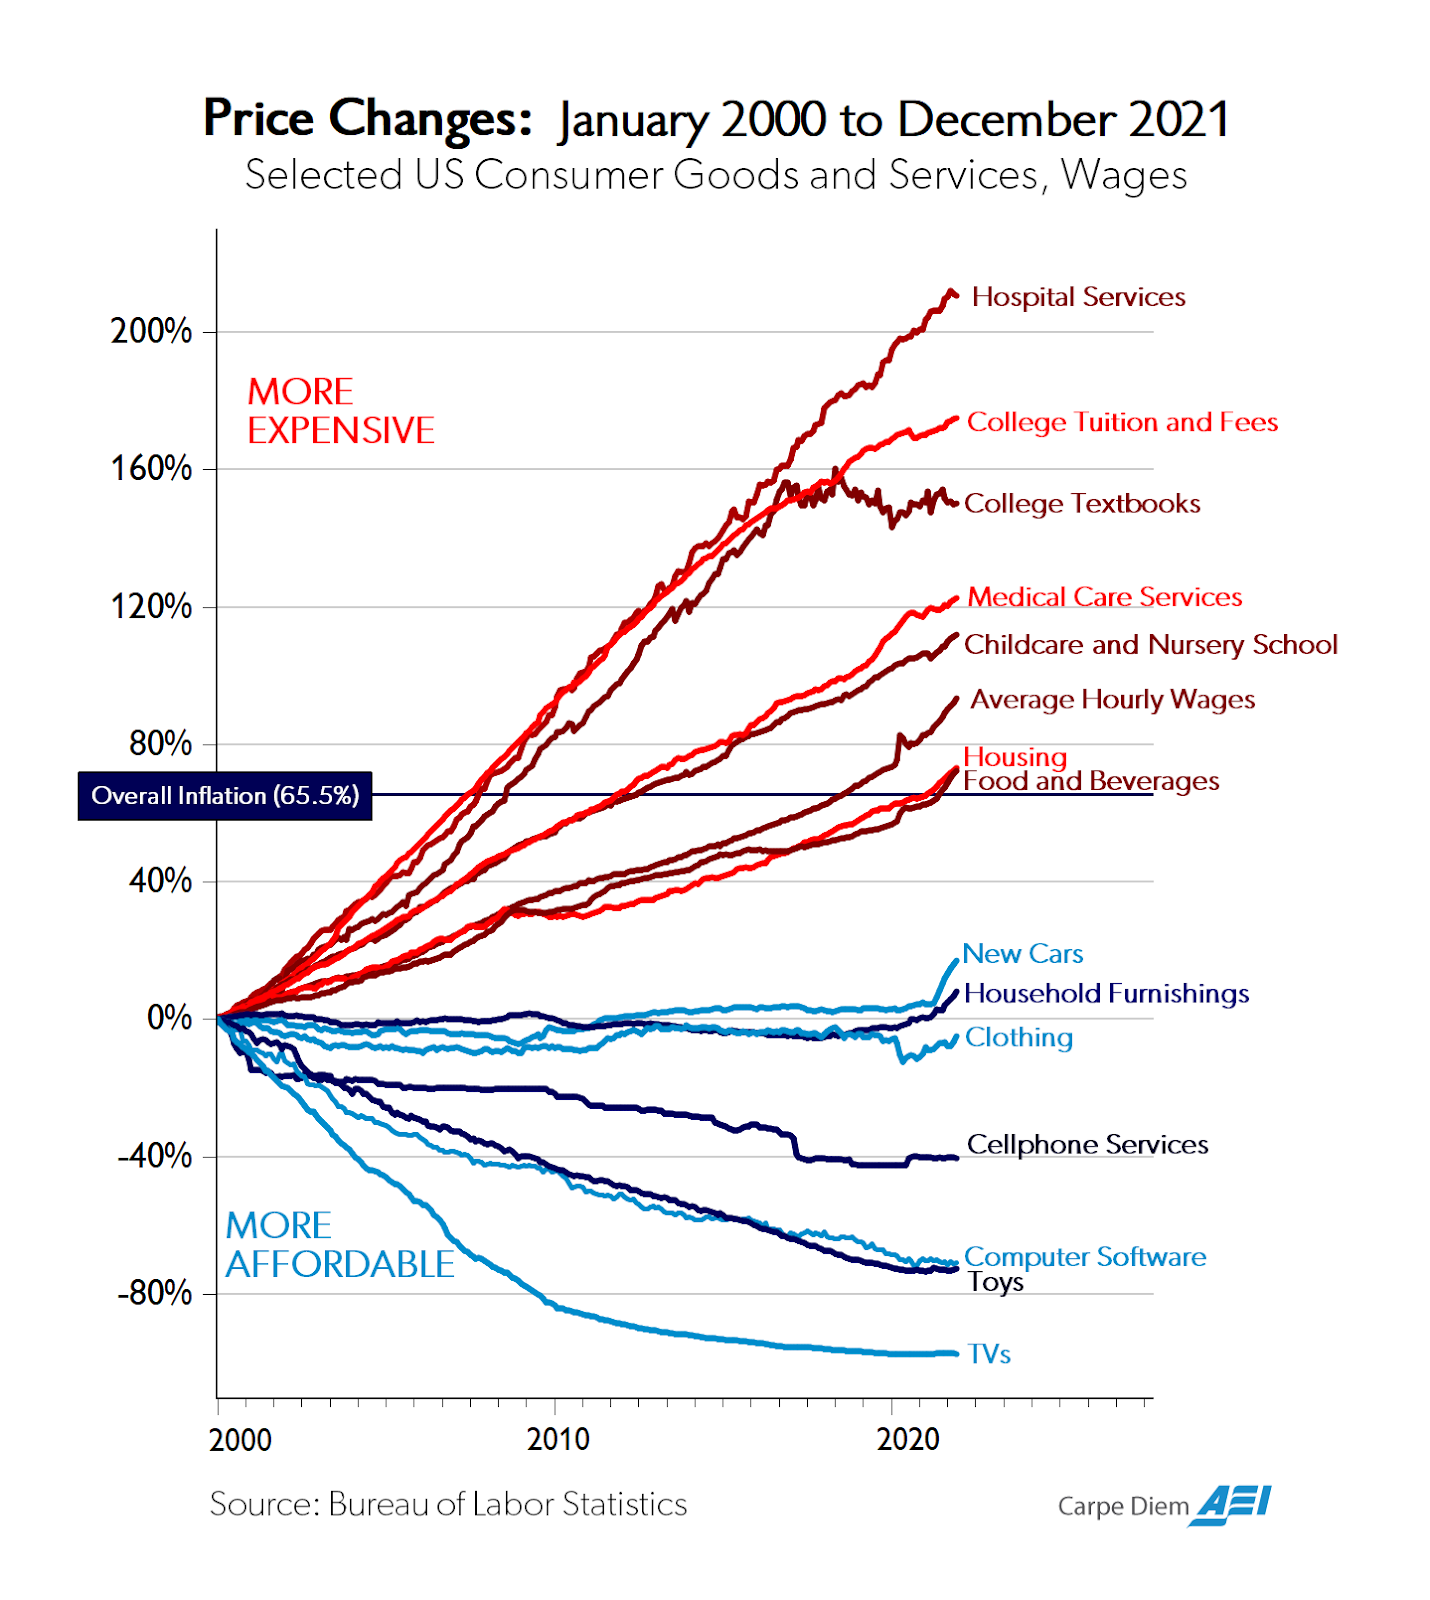 Price Changes January 2000 to December 2021